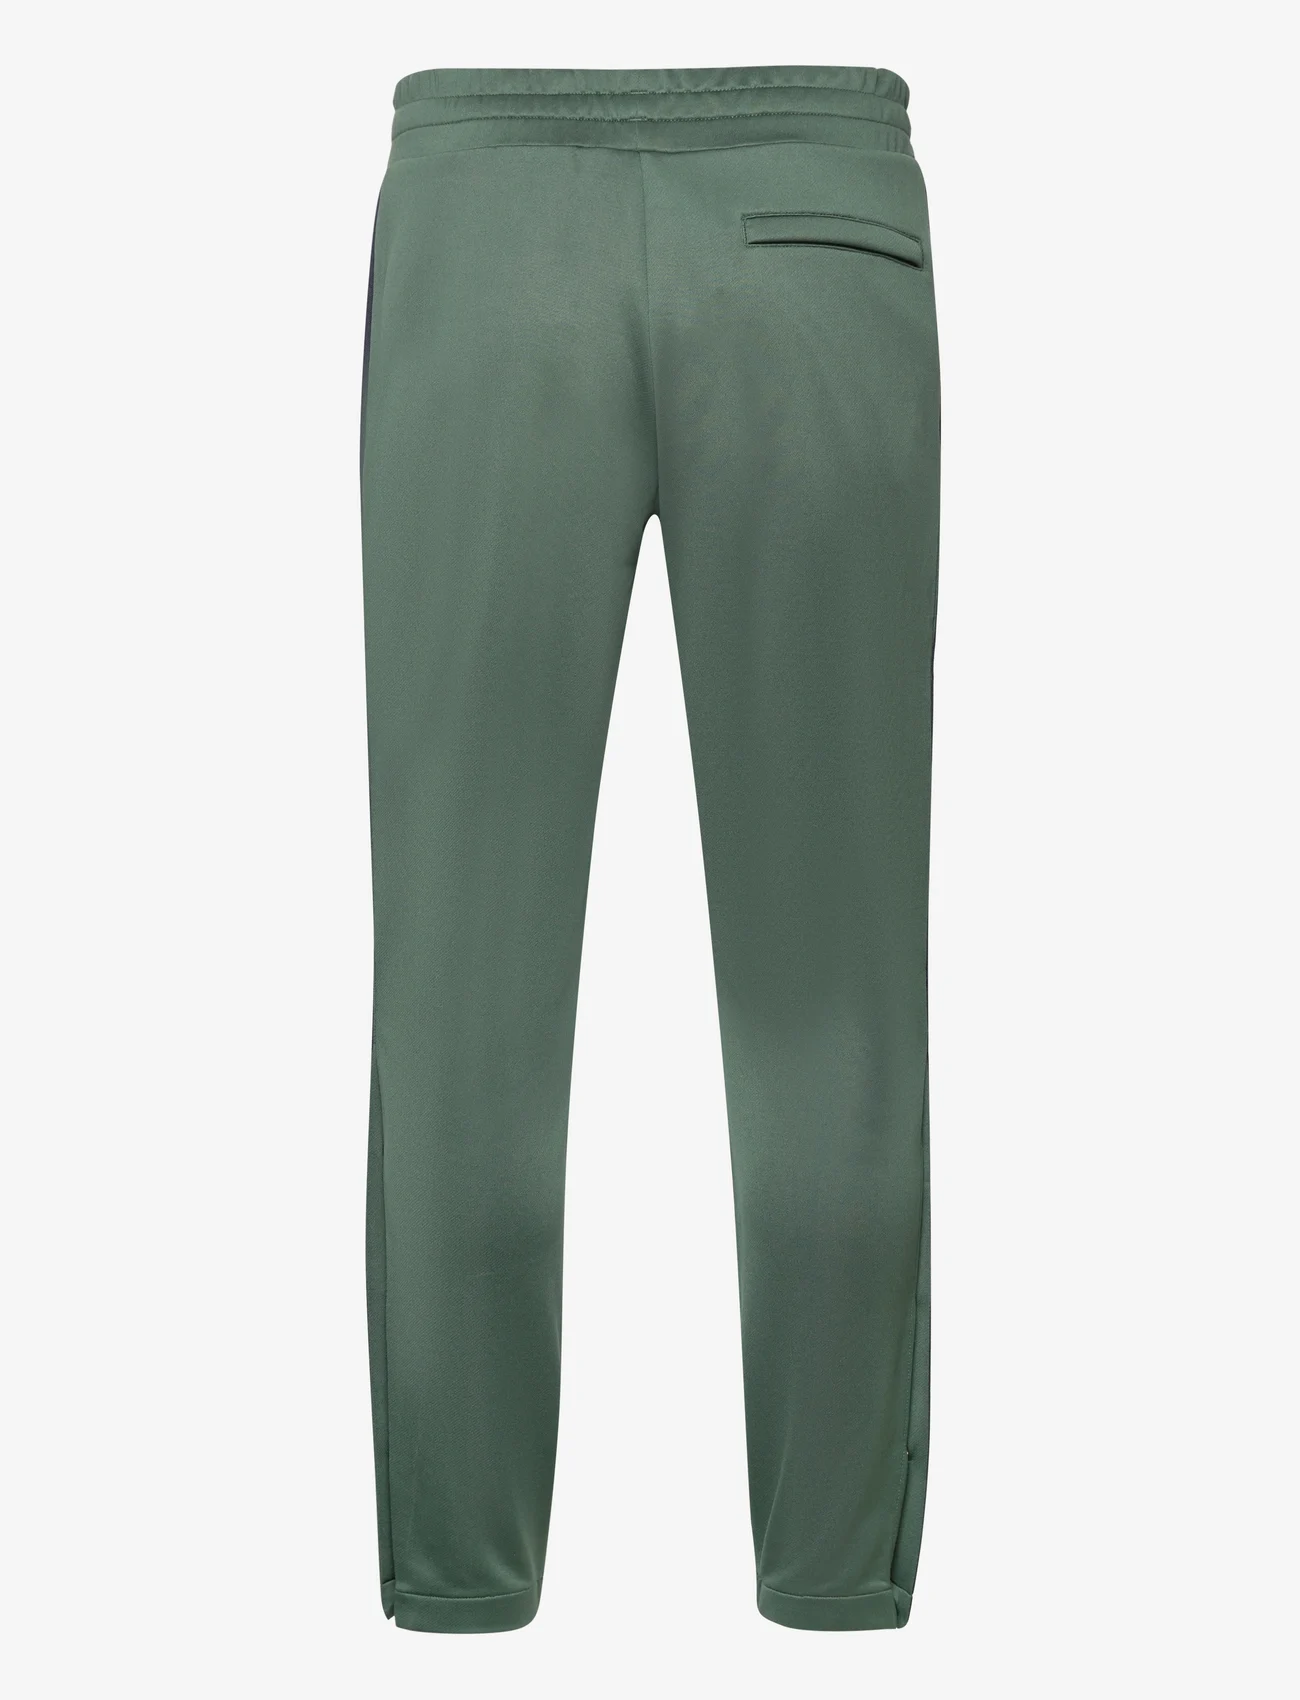 Björn Borg - ACE TAPERED PANTS - sportsbukser - sycamore - 1